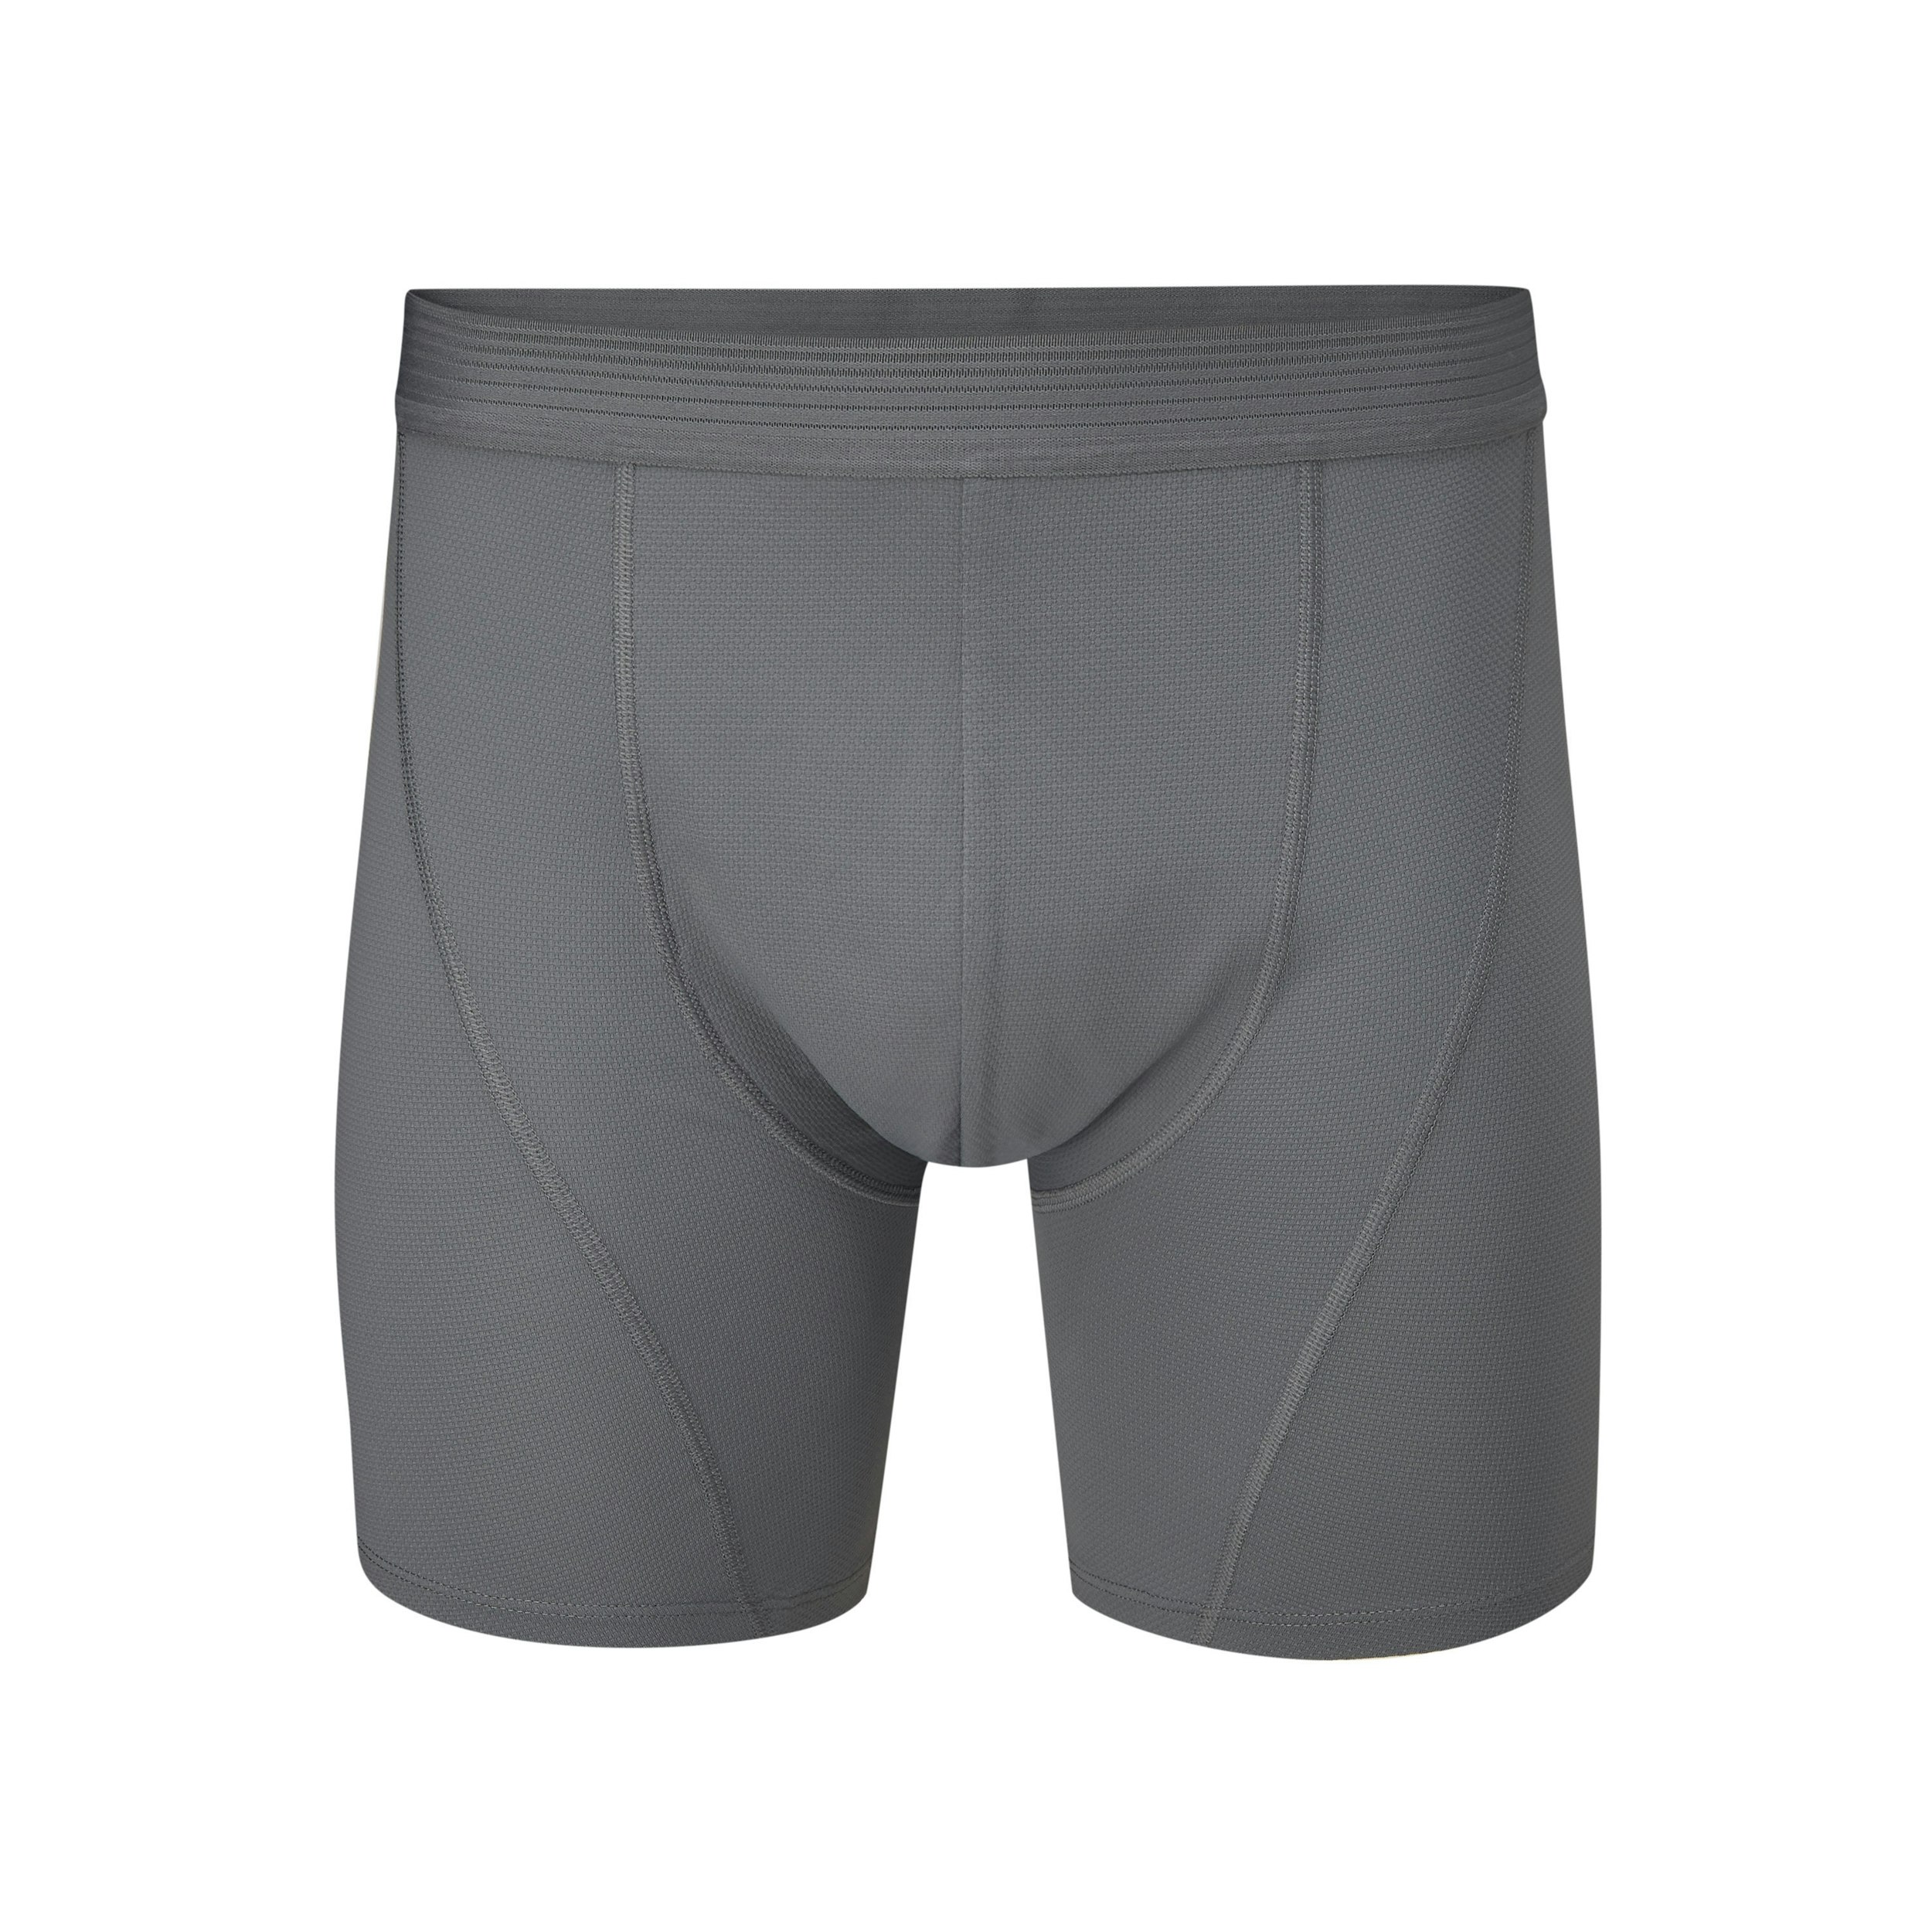 Men's Alpha Silver Boxers - Ultimate base layer boxers for active ...